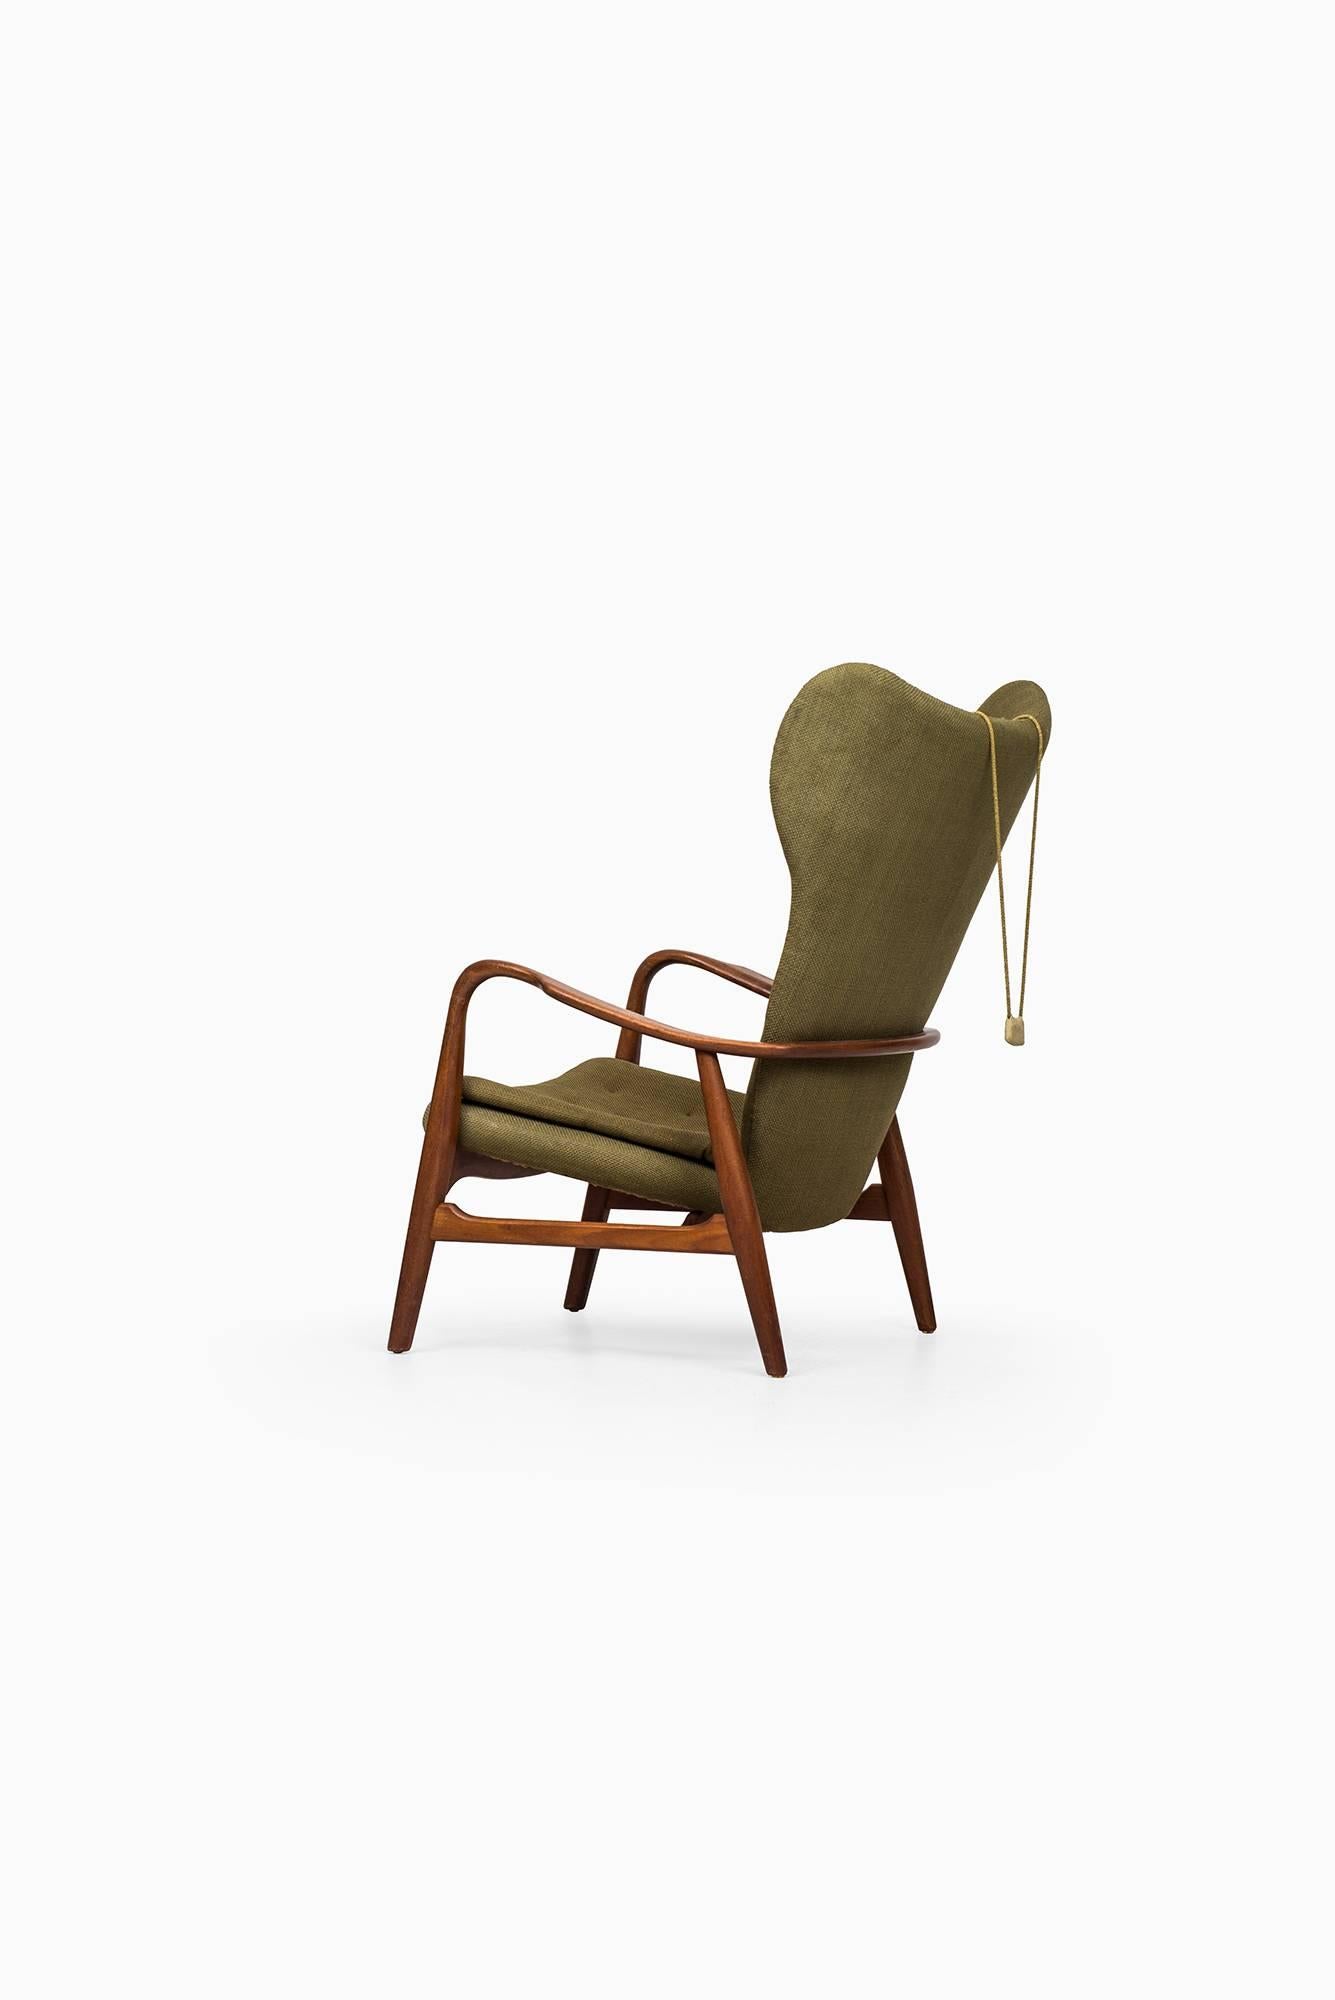 Danish Ib Madsen & Acton Schubell Wingbacked Easy Chair by Madsen & Schubell in Denmark